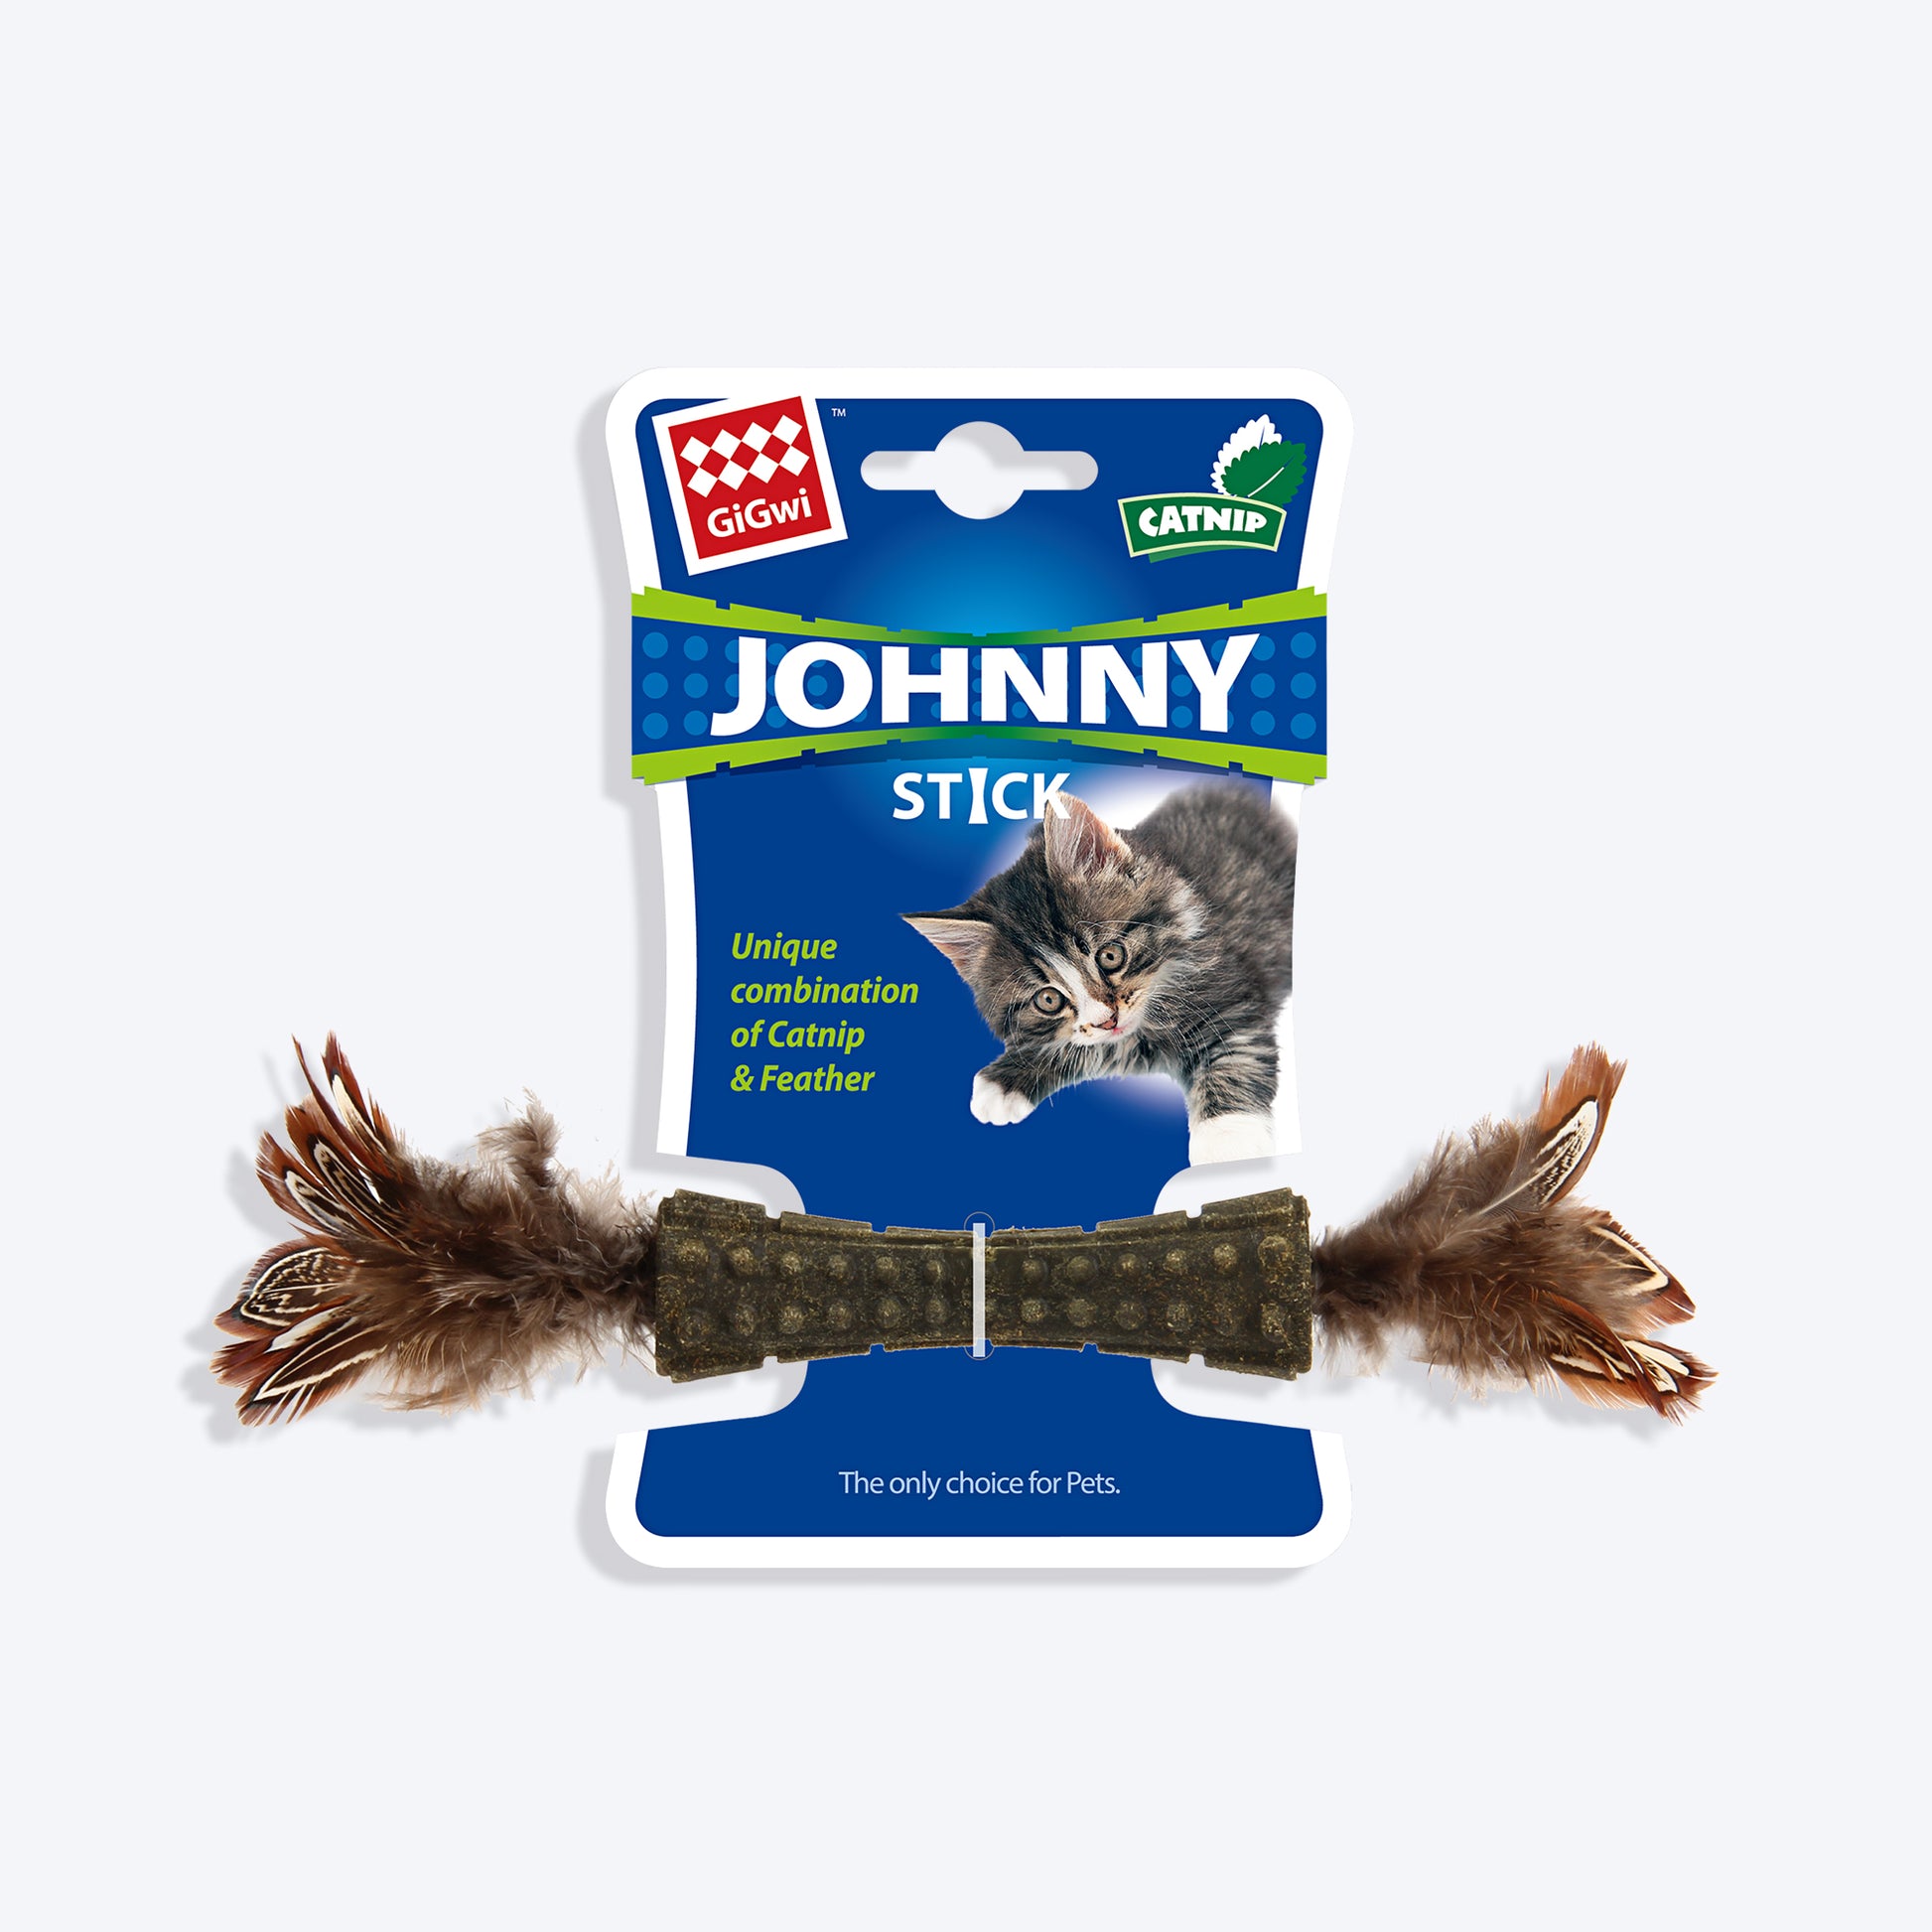 GiGwi Catnip Johnny Stick Cat Toy (with Double Side Feathers) - Brown - Heads Up For Tails